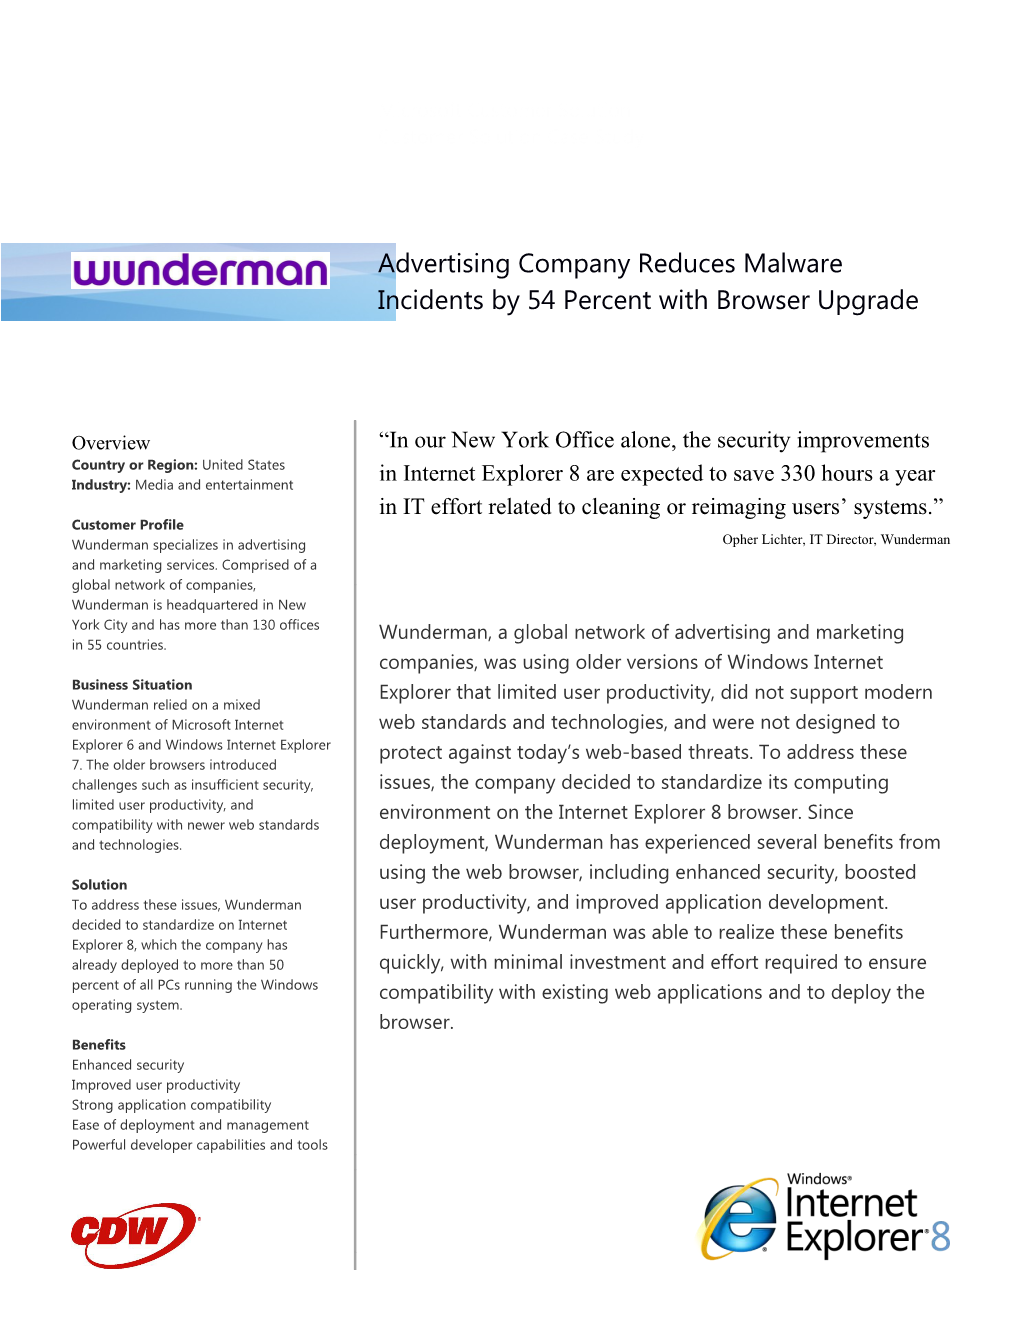 Advertising Company Reduces Malware Incidents by 54 Percent with Browser Upgrade